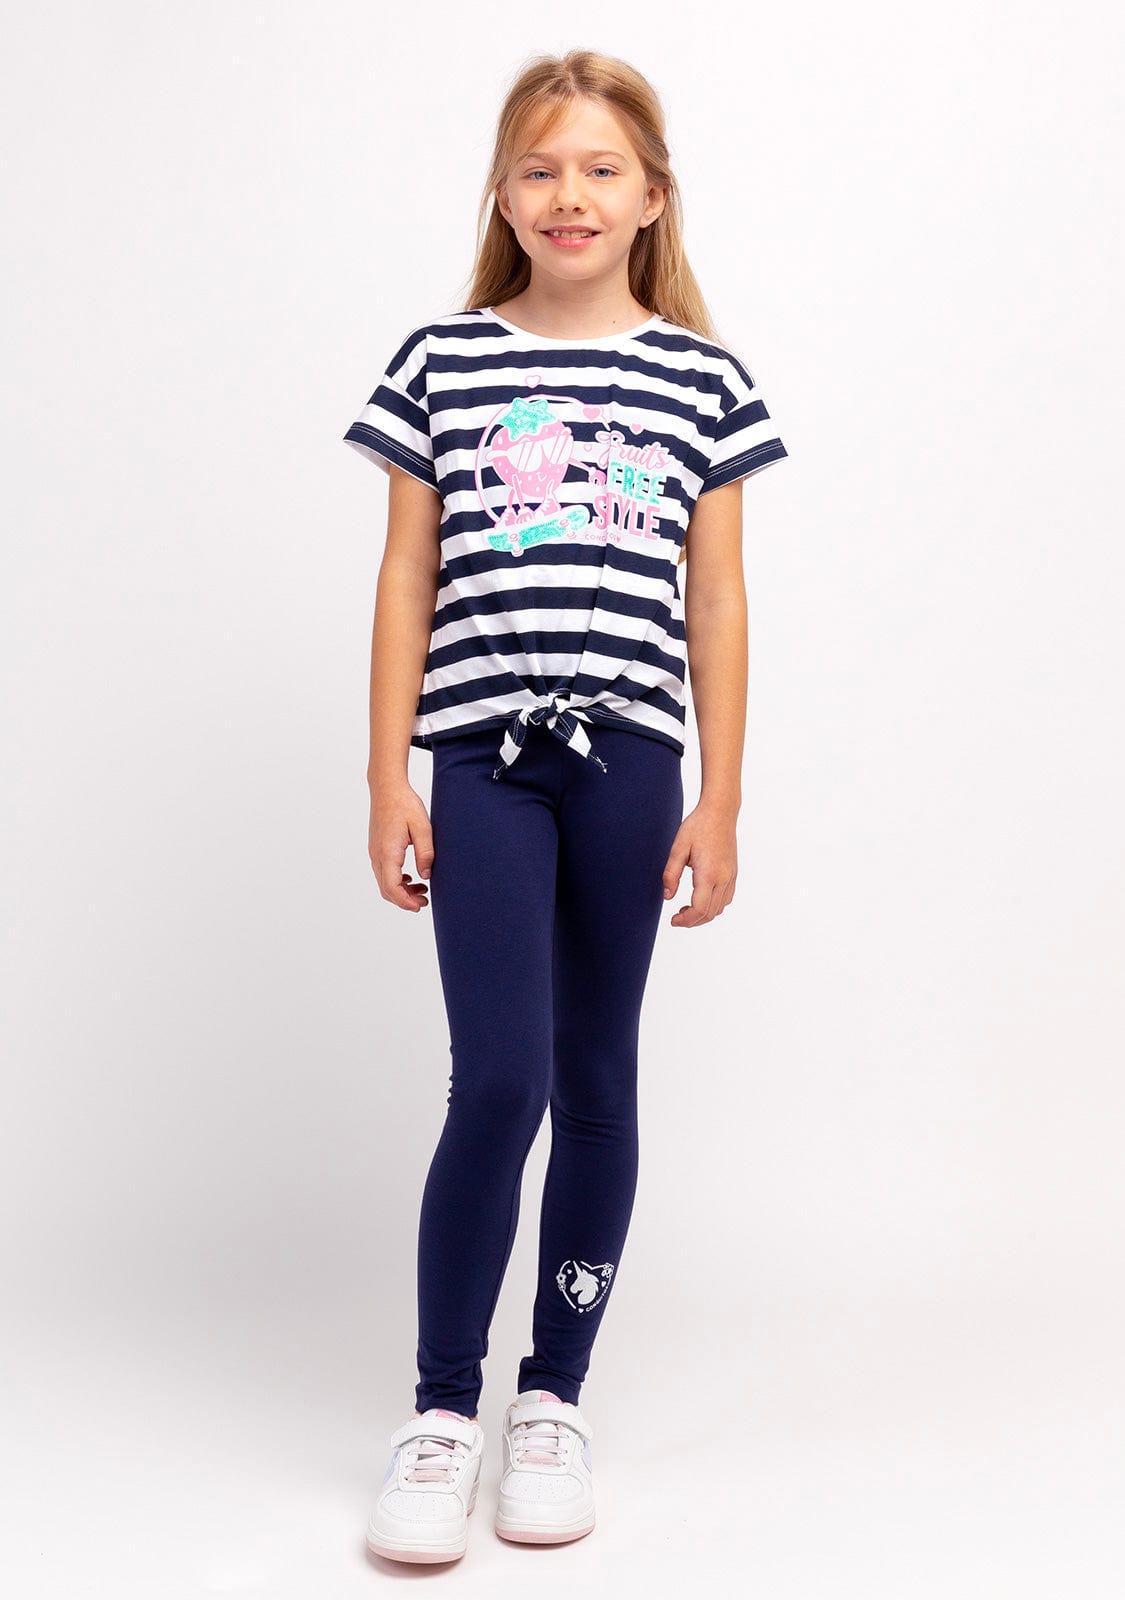 CONGUITOS TEXTIL Clothing Girl´s Stripes Knotted Strawberry Print T-shirt